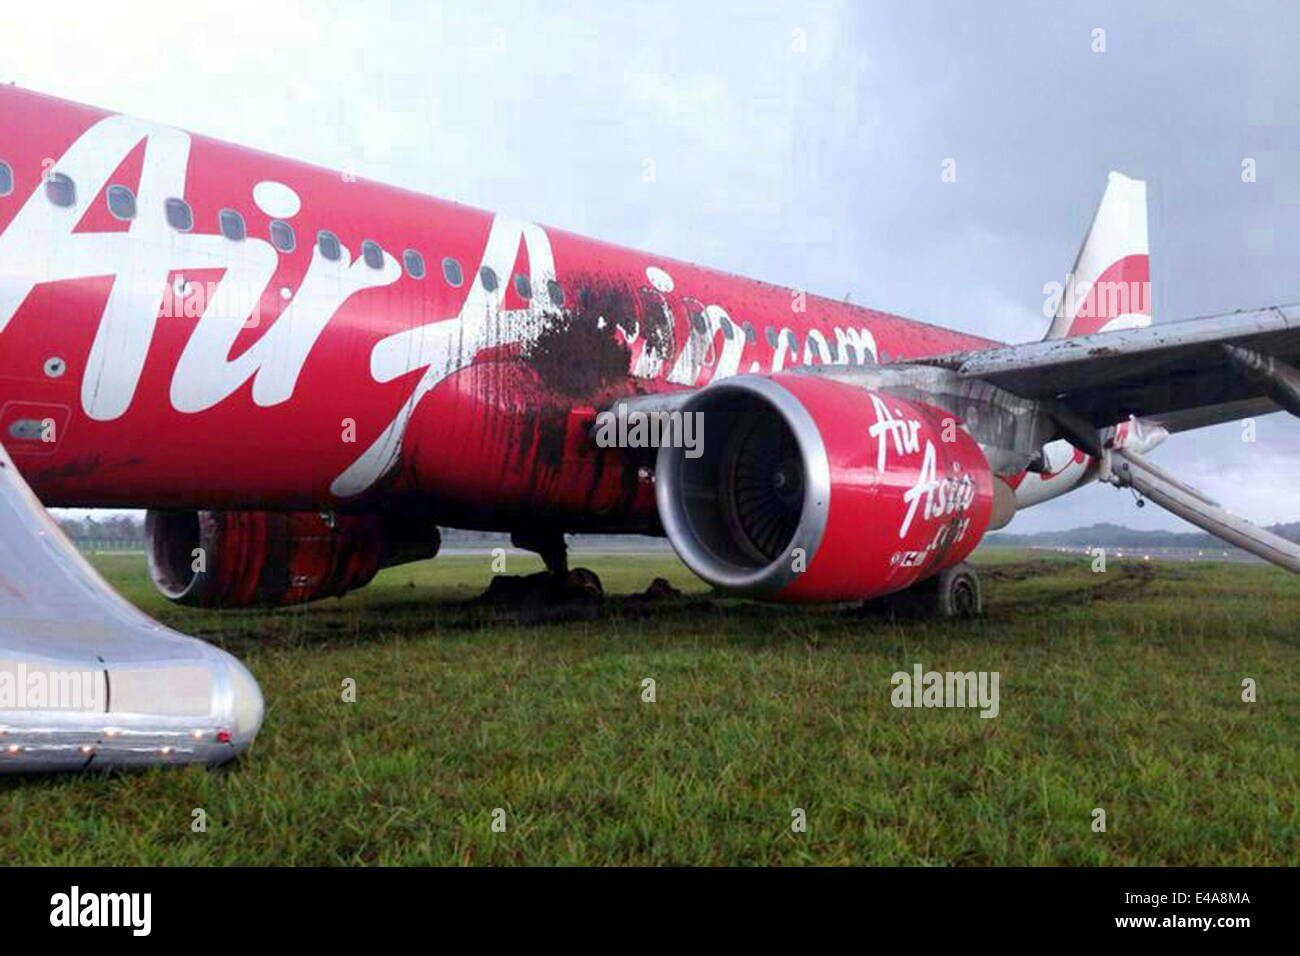 Bandar Seri Begawan, Brunei. 7th July, 2014. The skidded plane is seen at the Brunei International Airport in Bandar Seri Begawan, Brunei, July 7, 2014. An AirAsia flight AK278 with 102 passengers and seven crew members on board from Kuala Lumpur to Brunei skidded the runway at the Brunei International Airport Monday afternoon while it was trying to land during a heavy rain in the counry. Nobody was injured in the accident. Credit:  Jeffrey Wong/Xinhua/Alamy Live News Stock Photo